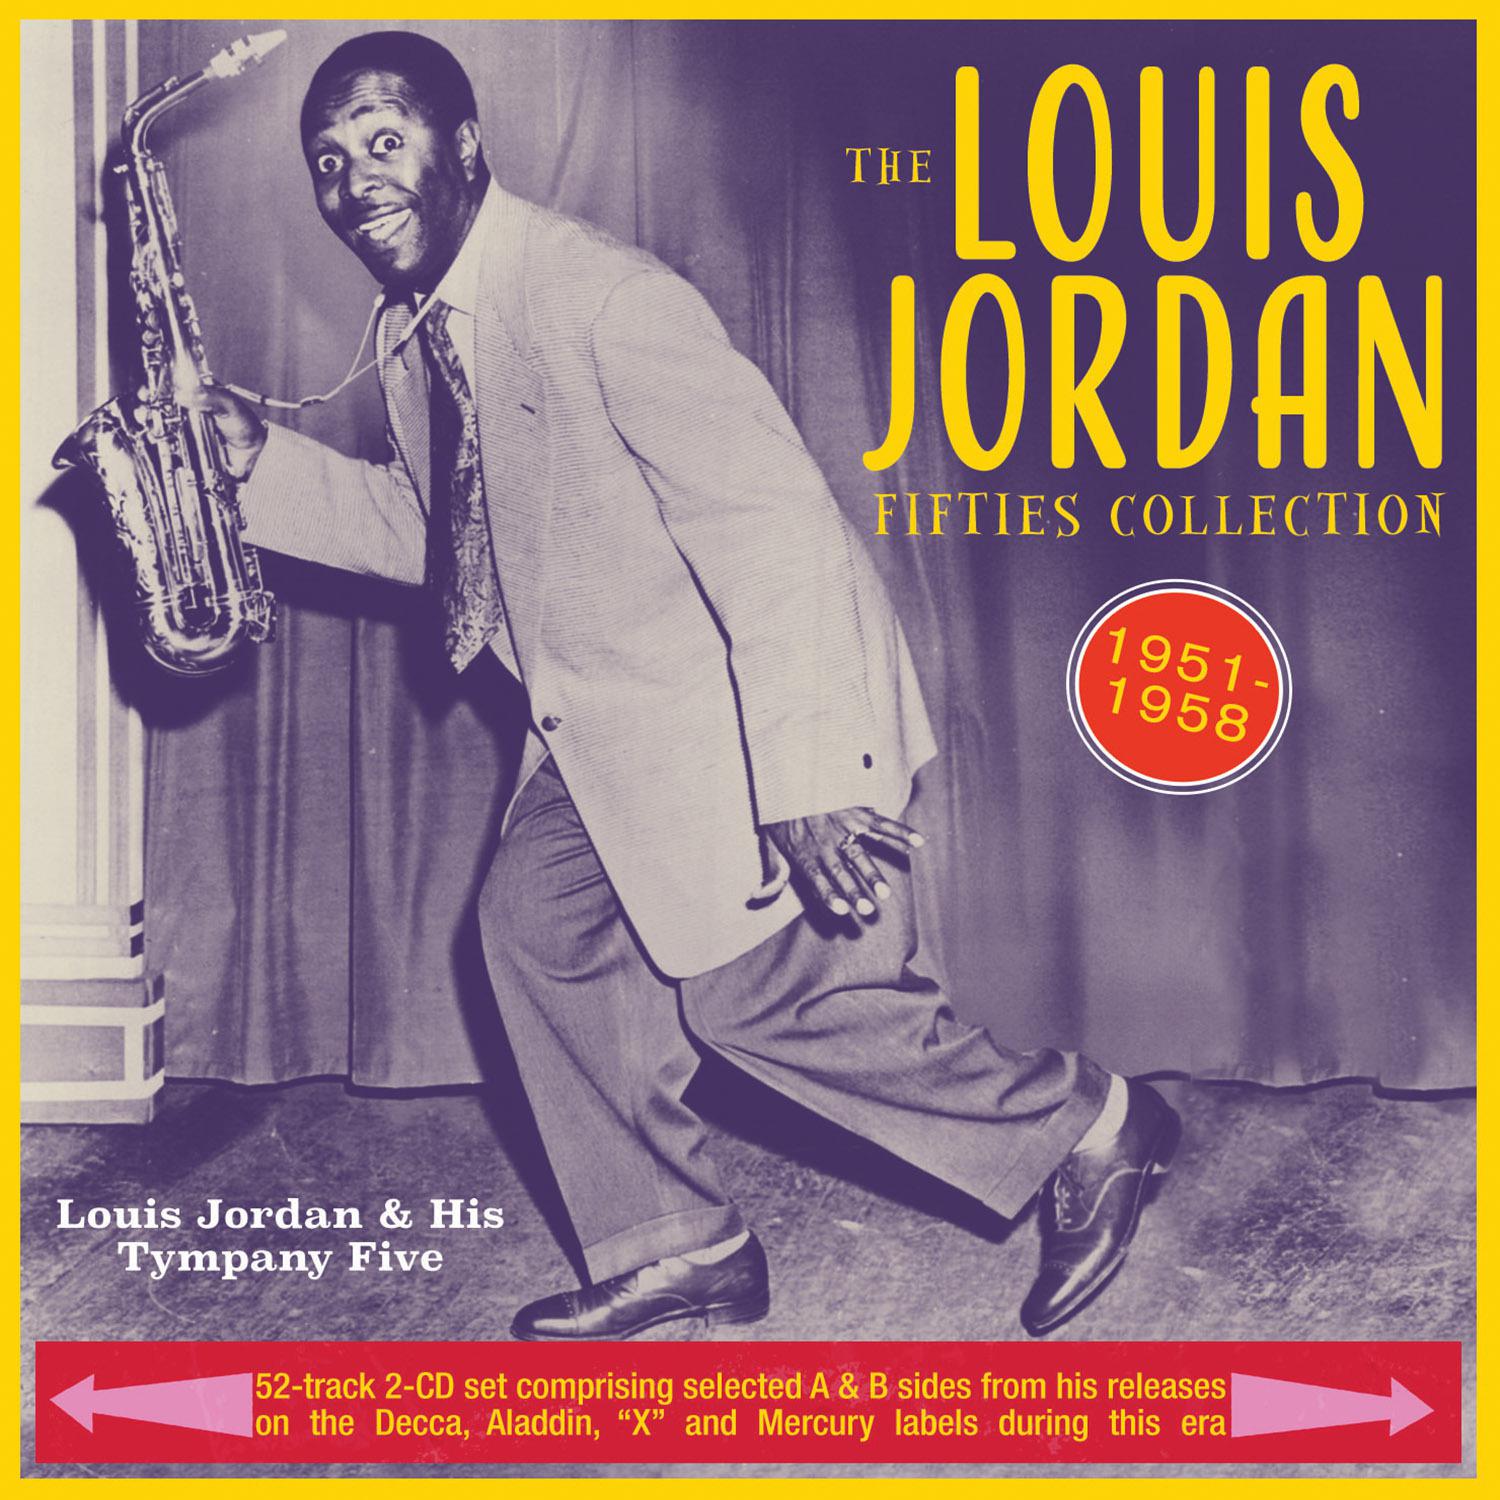 Louis Jordan and his Tympany Five - If You're So Smart How Come You Ain't Rich